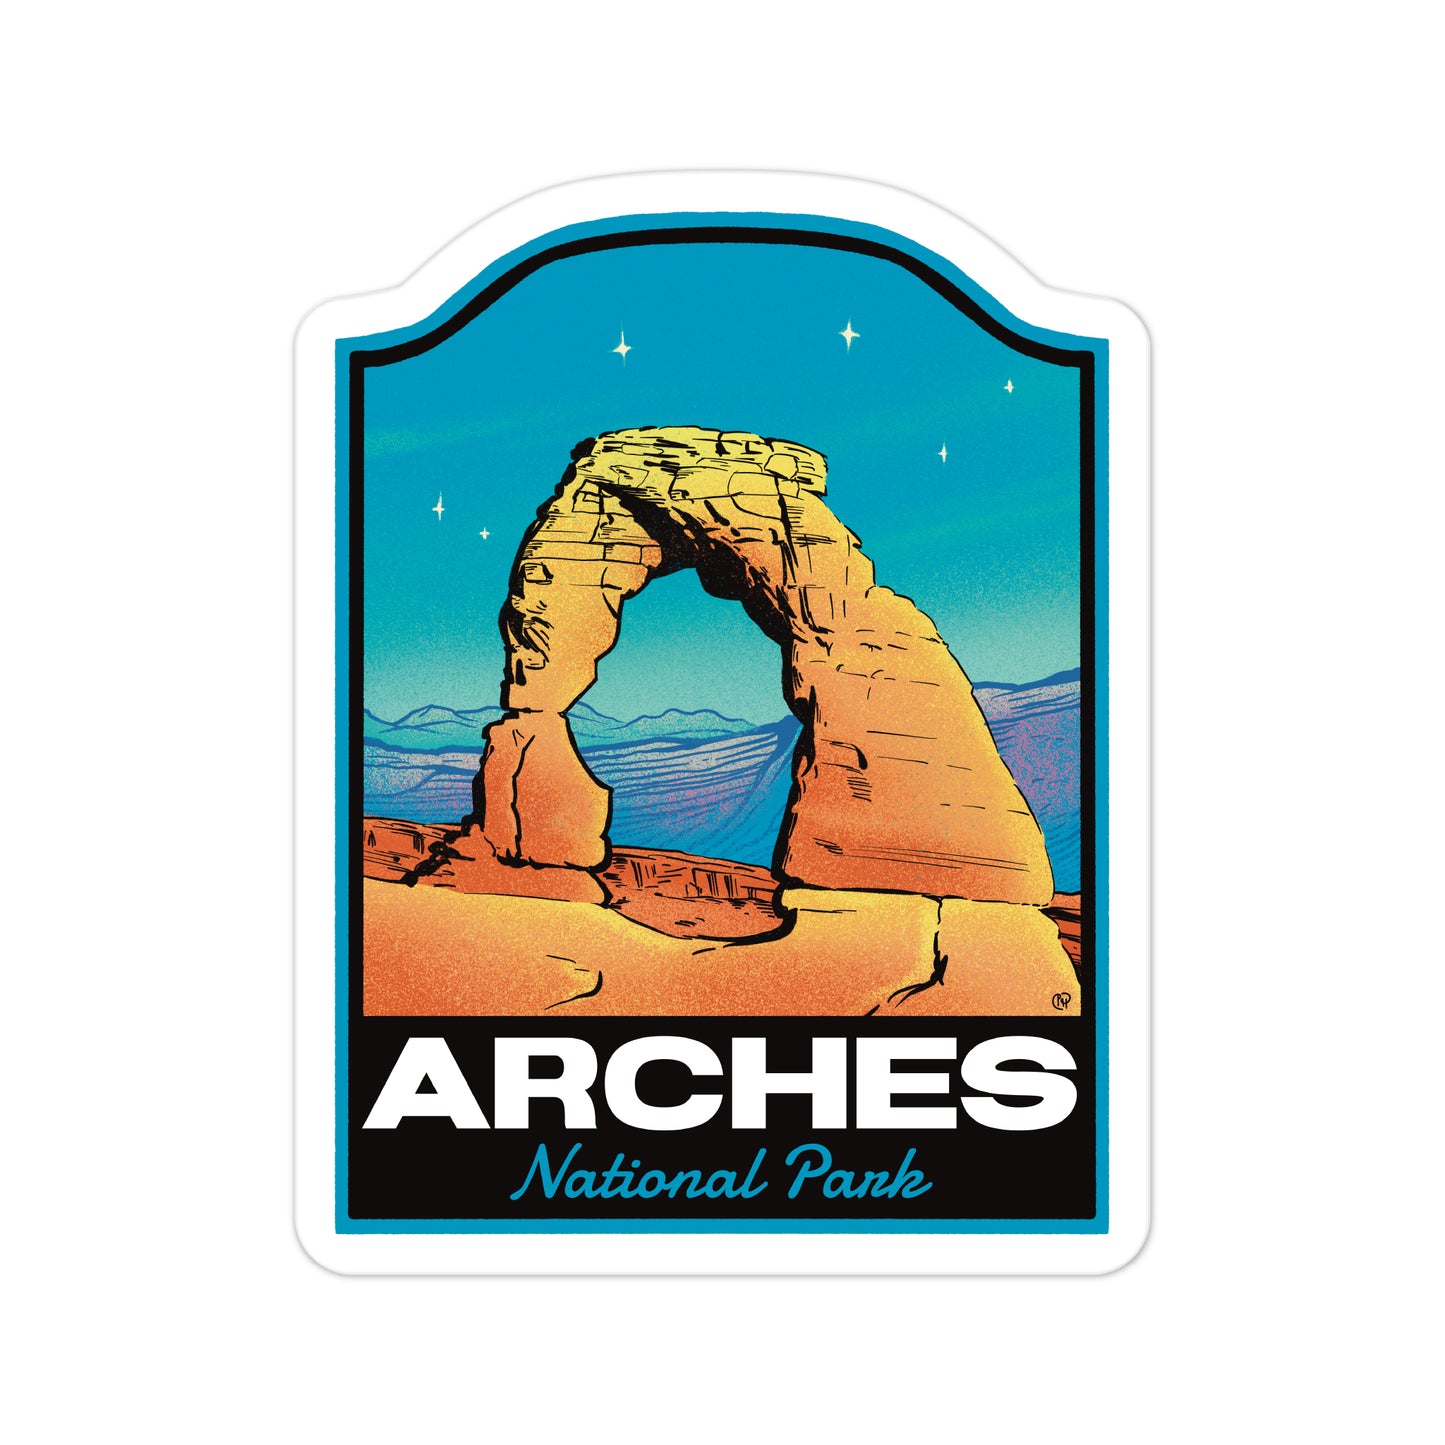 A sticker of Arches National Park